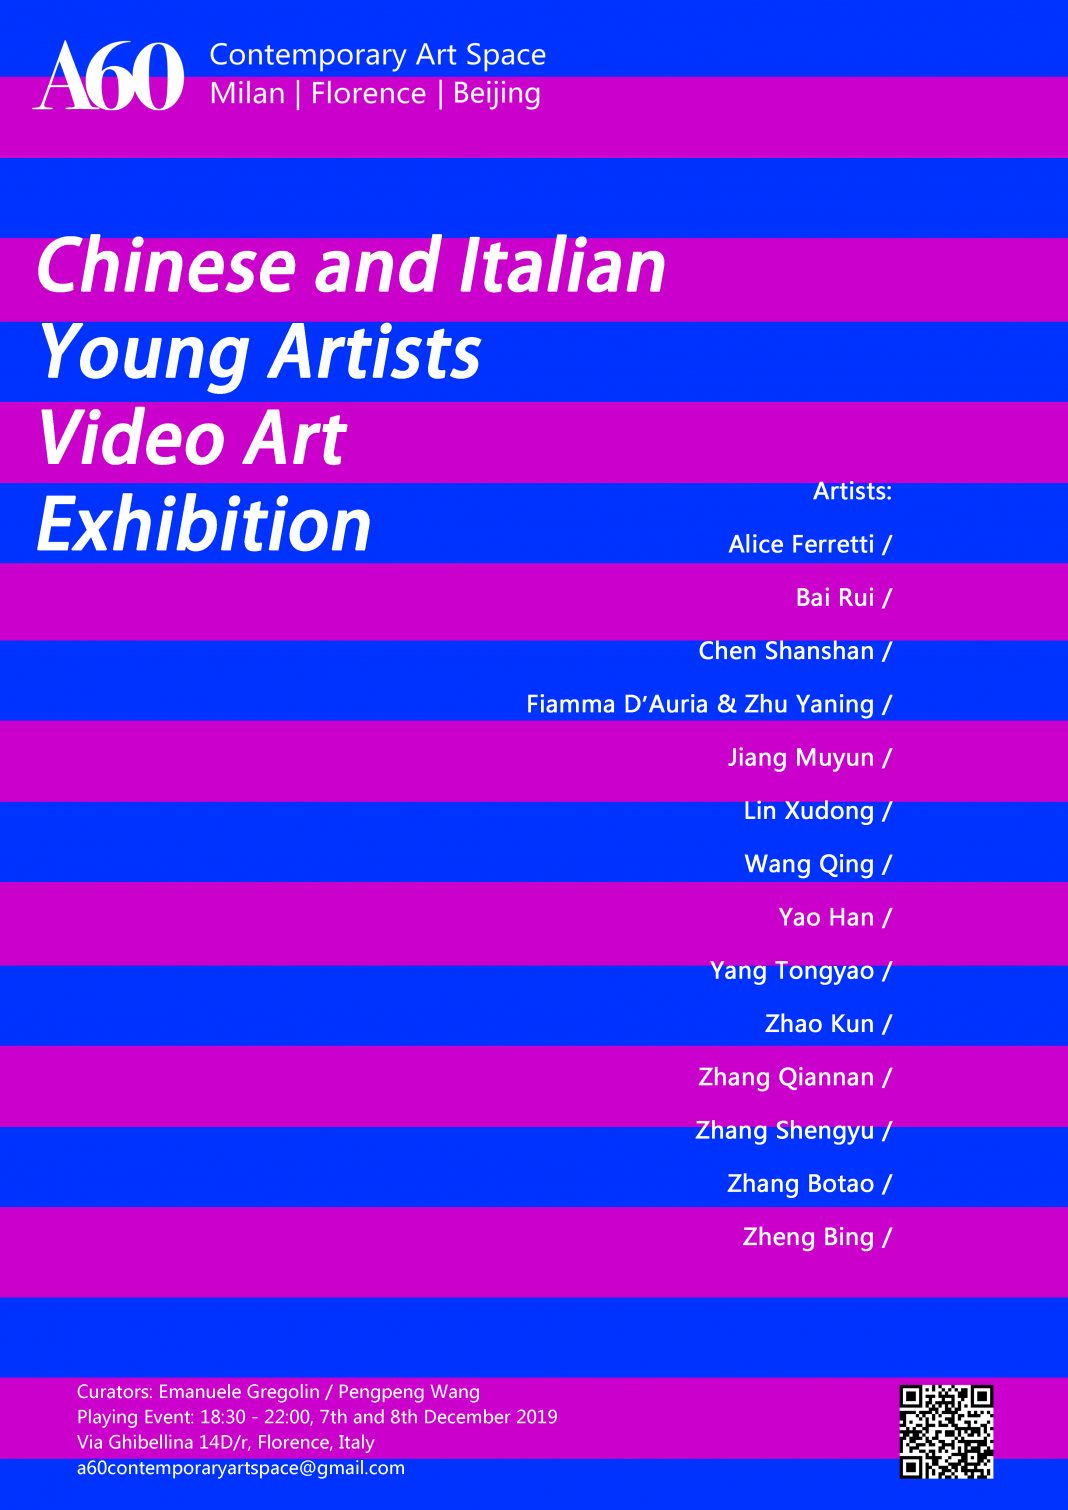 Chinese and Italian Young Artists Video Art Exhibitionhttps://www.exibart.com/repository/media/formidable/11/Video-Art-Exhibition-1068x1510.jpg